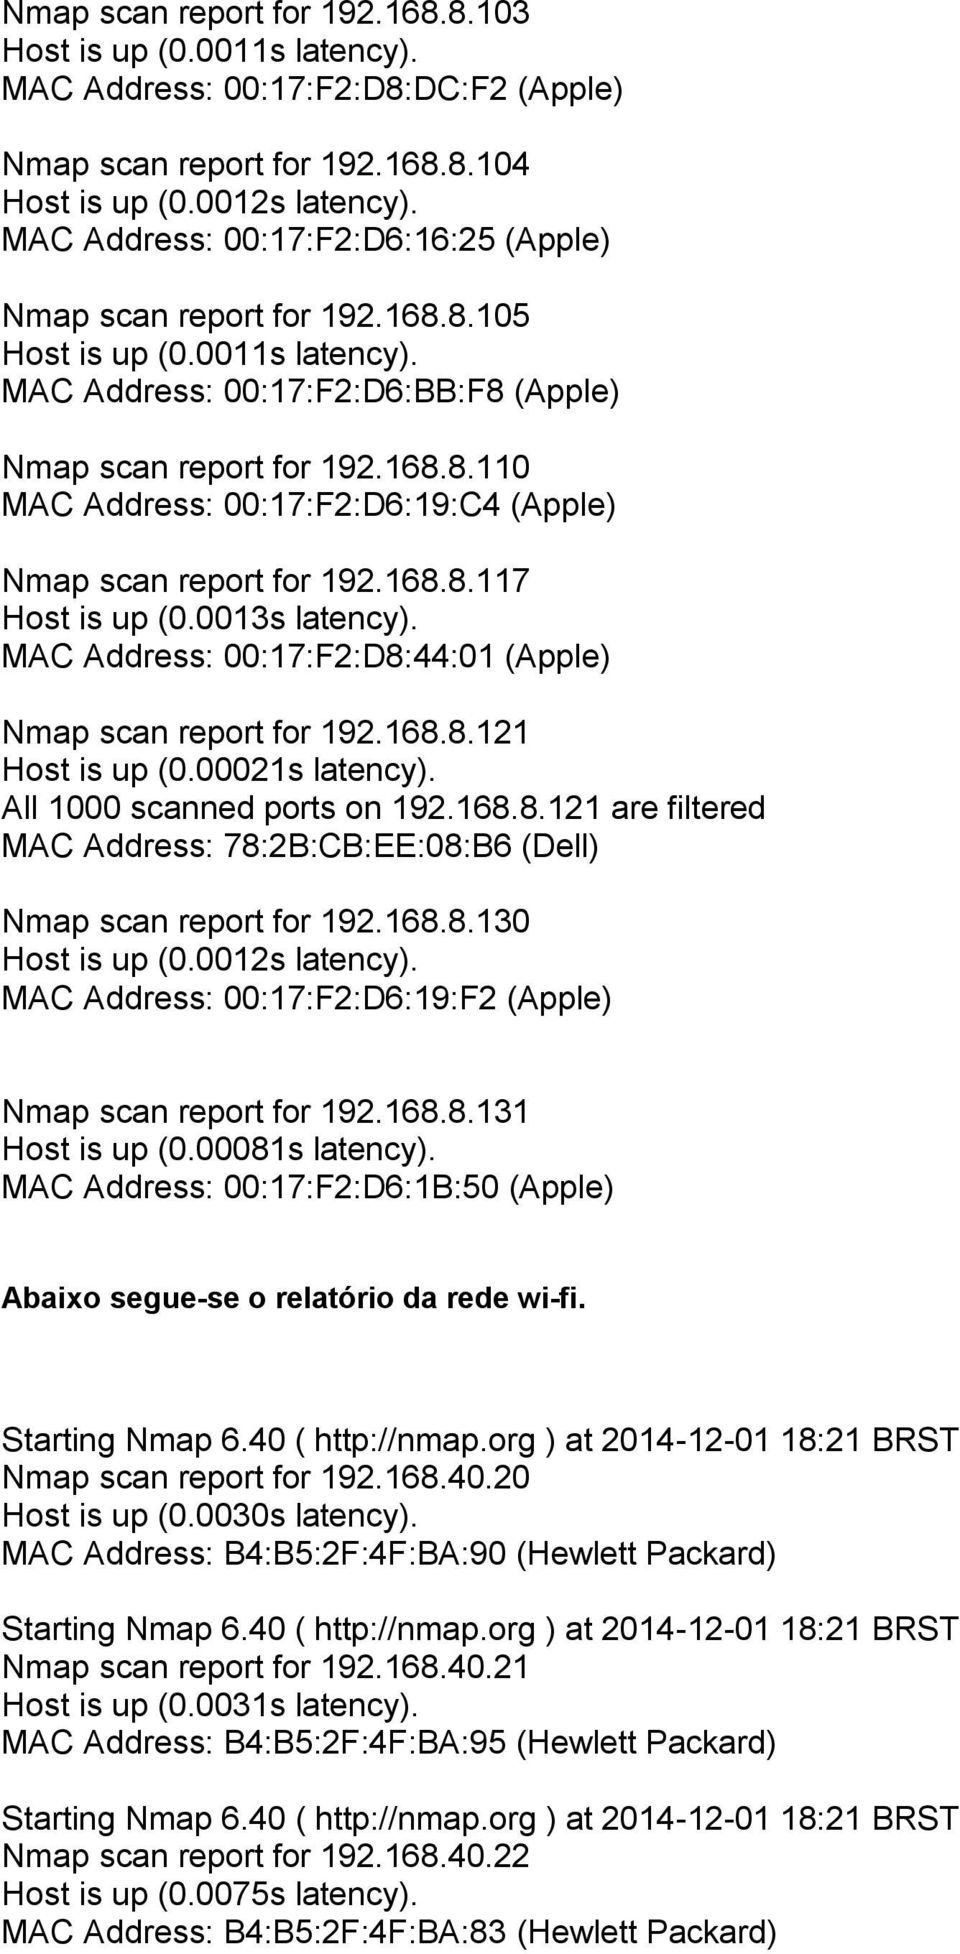 168.8.117 Host is up (0.0013s latency). MAC Address: 00:17:F2:D8:44:01 (Apple) Nmap scan report for 192.168.8.121 Host is up (0.00021s latency). All 1000 scanned ports on 192.168.8.121 are filtered MAC Address: 78:2B:CB:EE:08:B6 (Dell) Nmap scan report for 192.